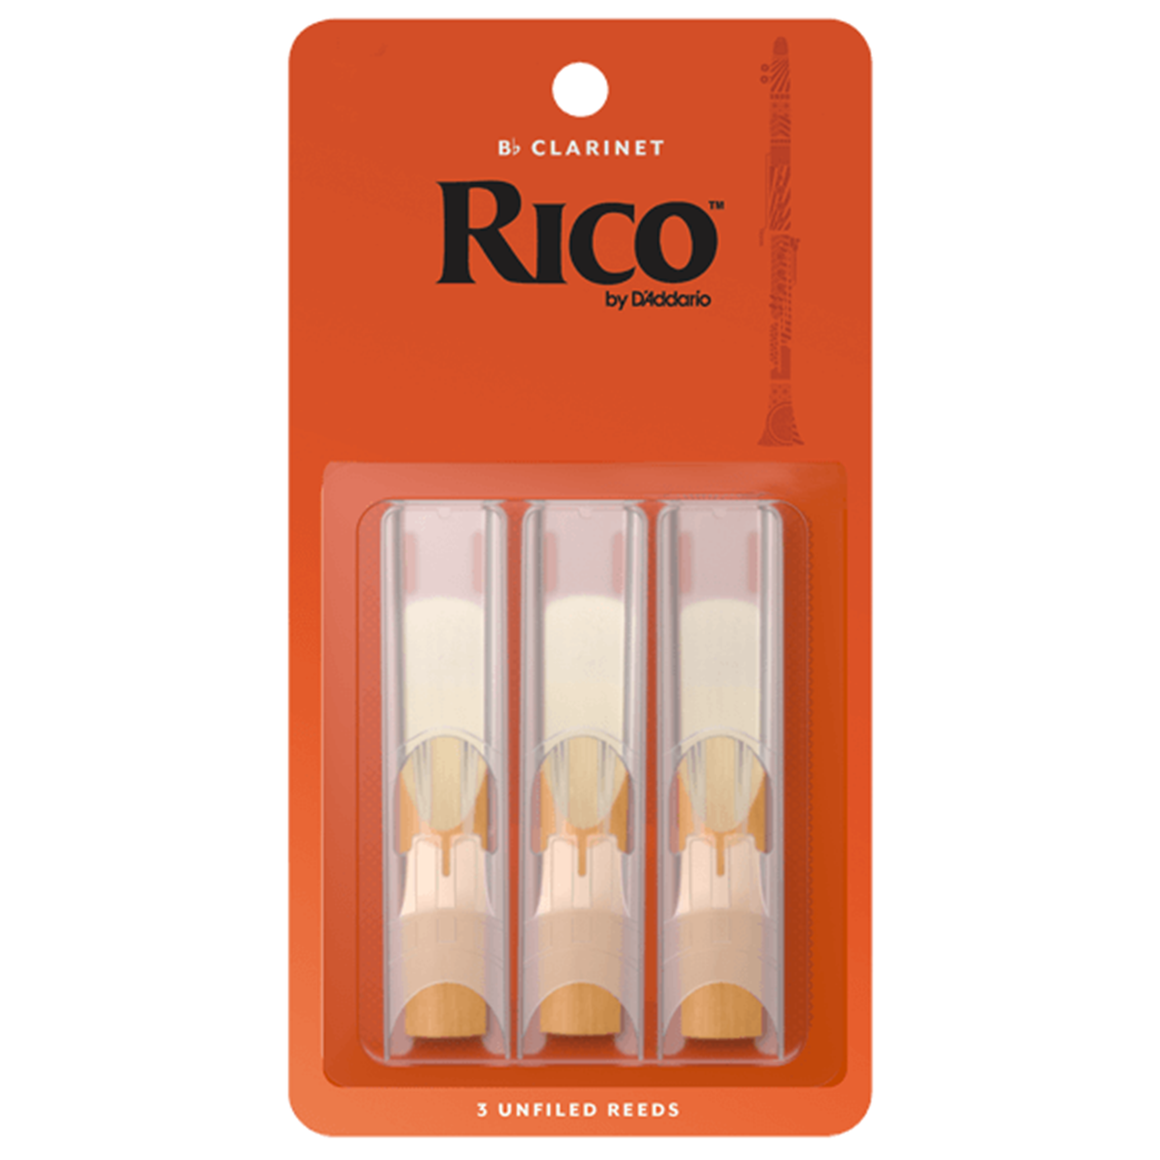 RICO RCA0320 #2 Clarinet Reeds, 3 Pack